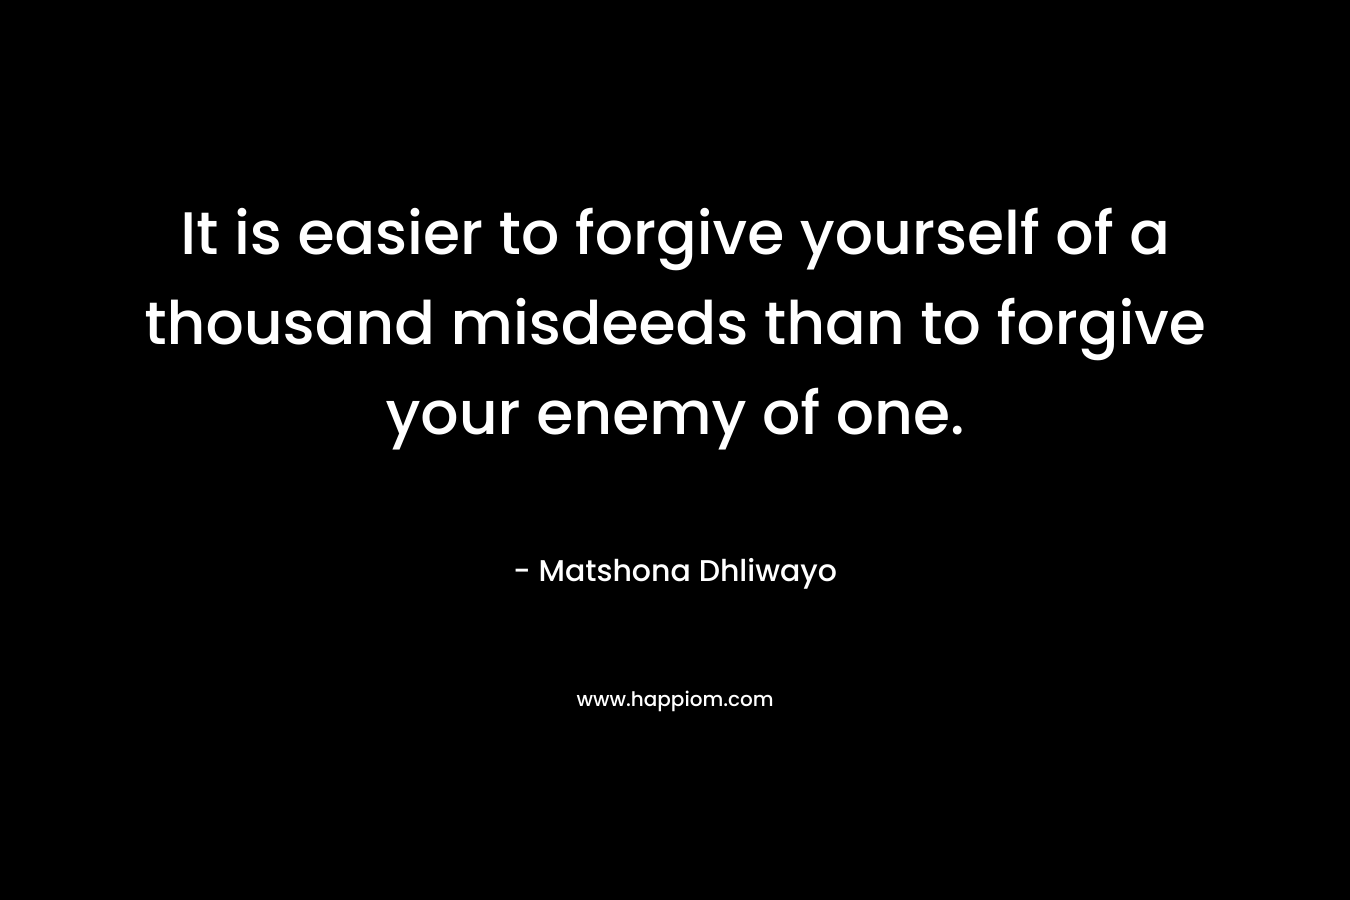 It is easier to forgive yourself of a thousand misdeeds than to forgive your enemy of one.